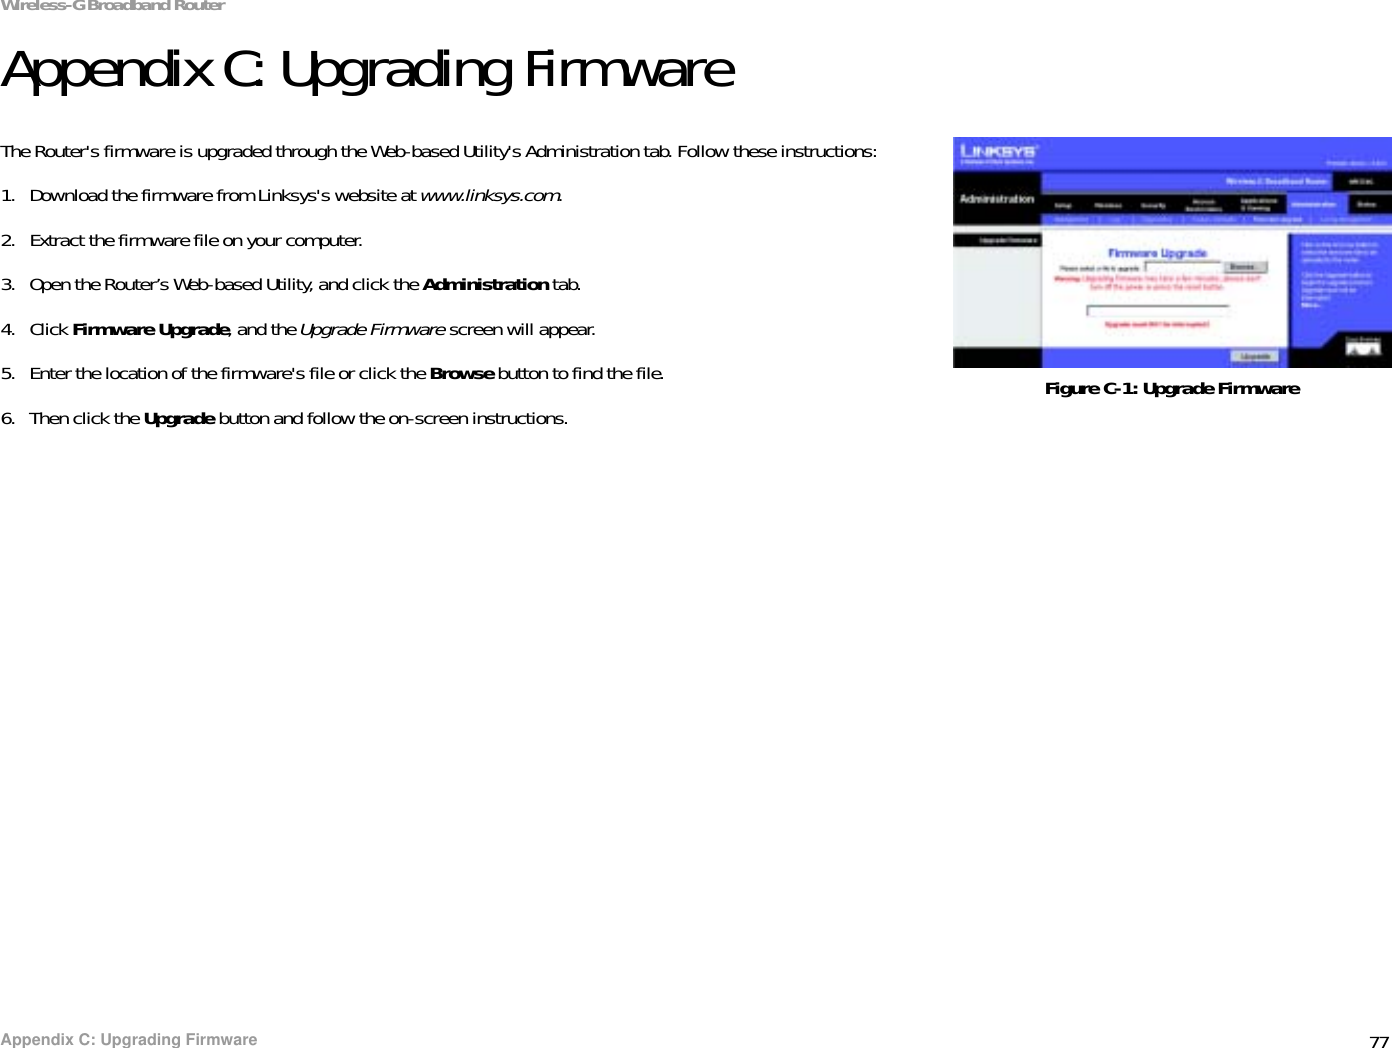 77Appendix C: Upgrading FirmwareWireless-G Broadband RouterAppendix C: Upgrading FirmwareThe Router&apos;s firmware is upgraded through the Web-based Utility&apos;s Administration tab. Follow these instructions:1. Download the firmware from Linksys&apos;s website at www.linksys.com.2. Extract the firmware file on your computer.3. Open the Router’s Web-based Utility, and click the Administration tab.4. Click Firmware Upgrade, and the Upgrade Firmware screen will appear.5. Enter the location of the firmware&apos;s file or click the Browse button to find the file.6. Then click the Upgrade button and follow the on-screen instructions. Figure C-1: Upgrade Firmware